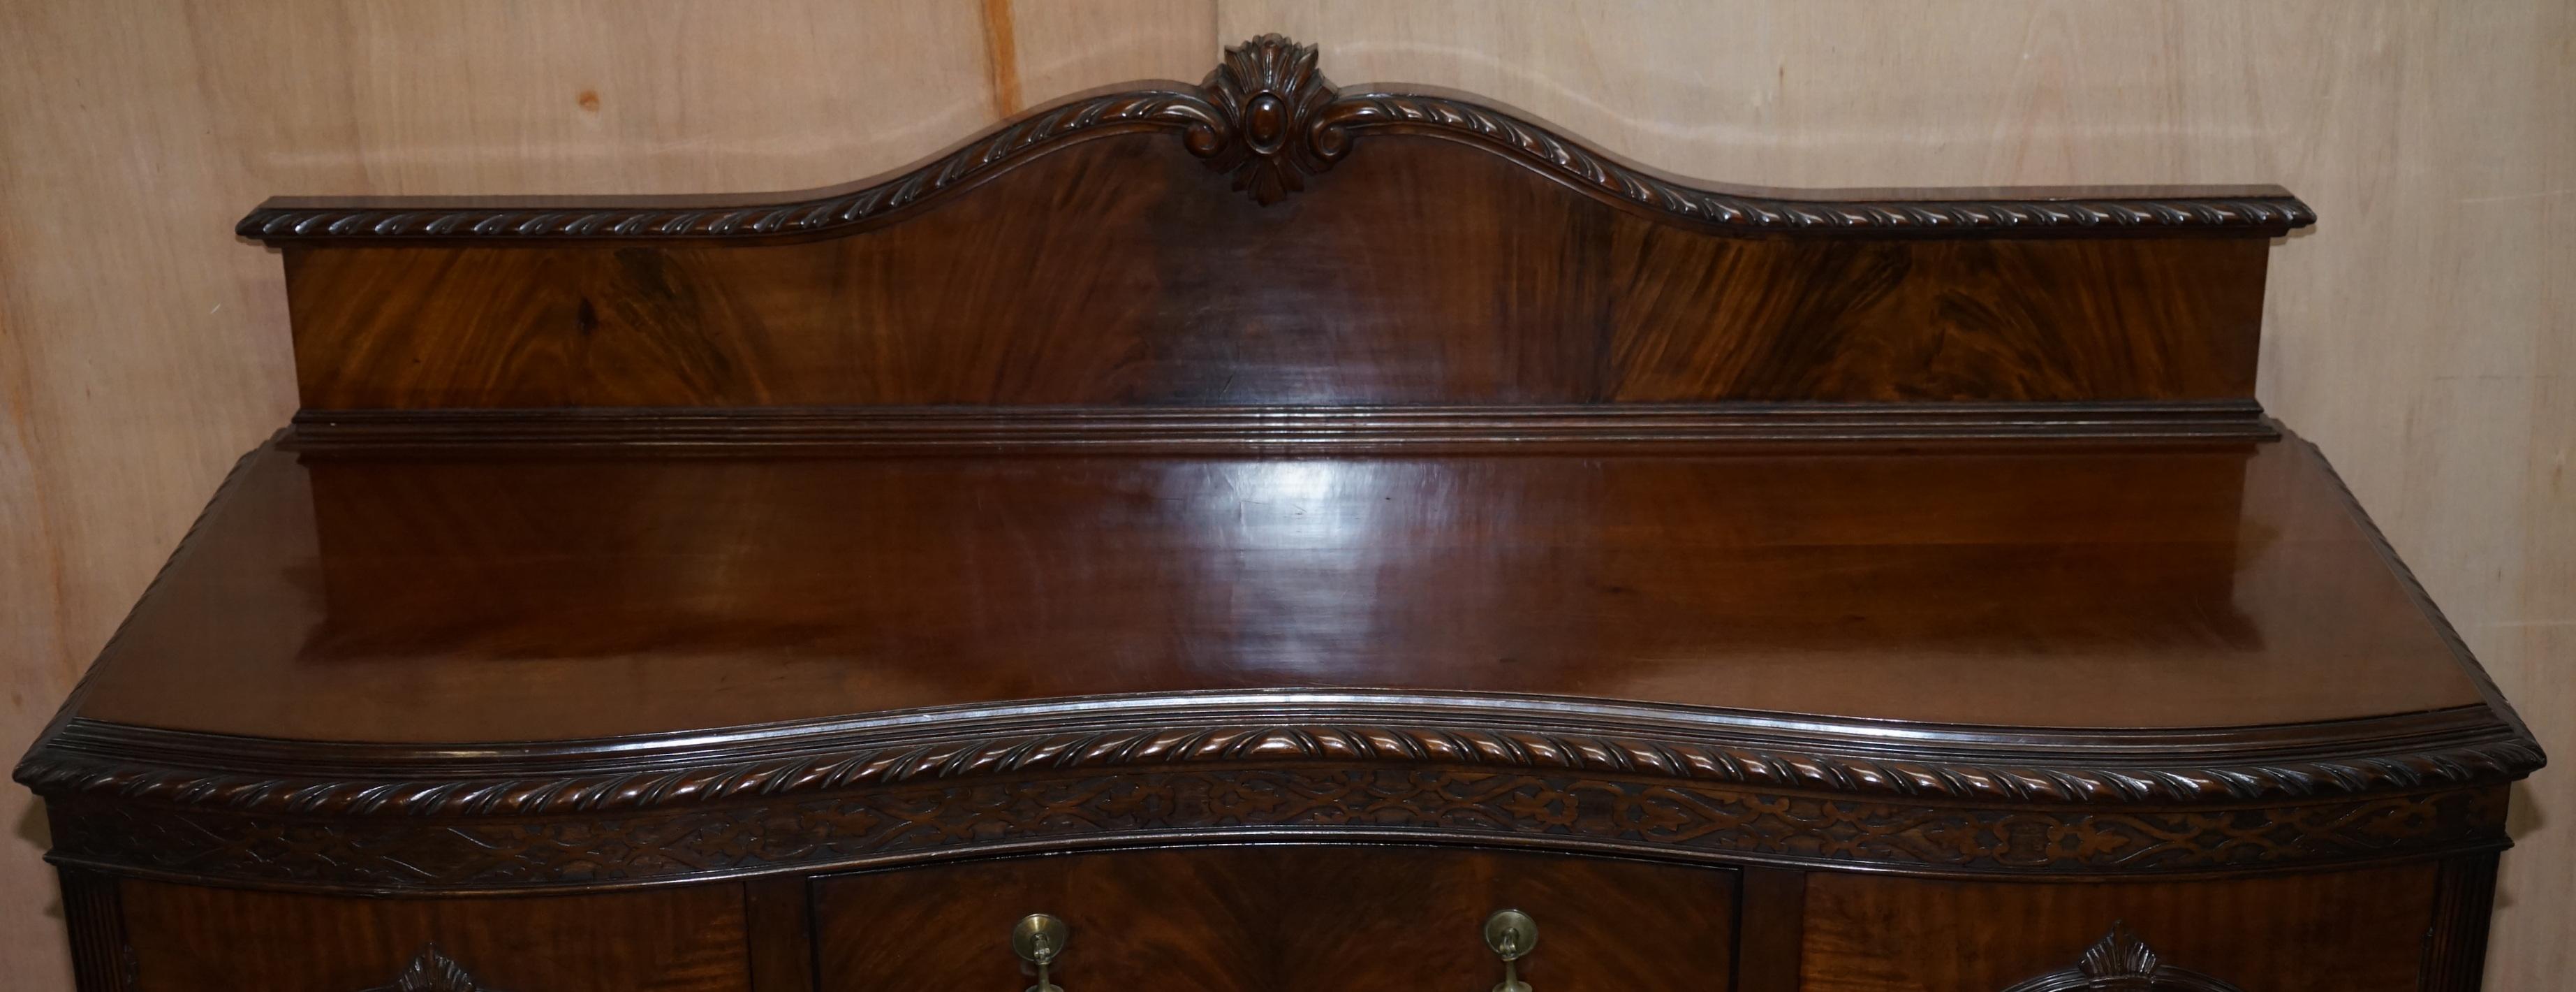 Hand-Crafted Claw & Ball Feet Flamed Mahogany Sideboard Drawers Chippendale Style, circa 1920